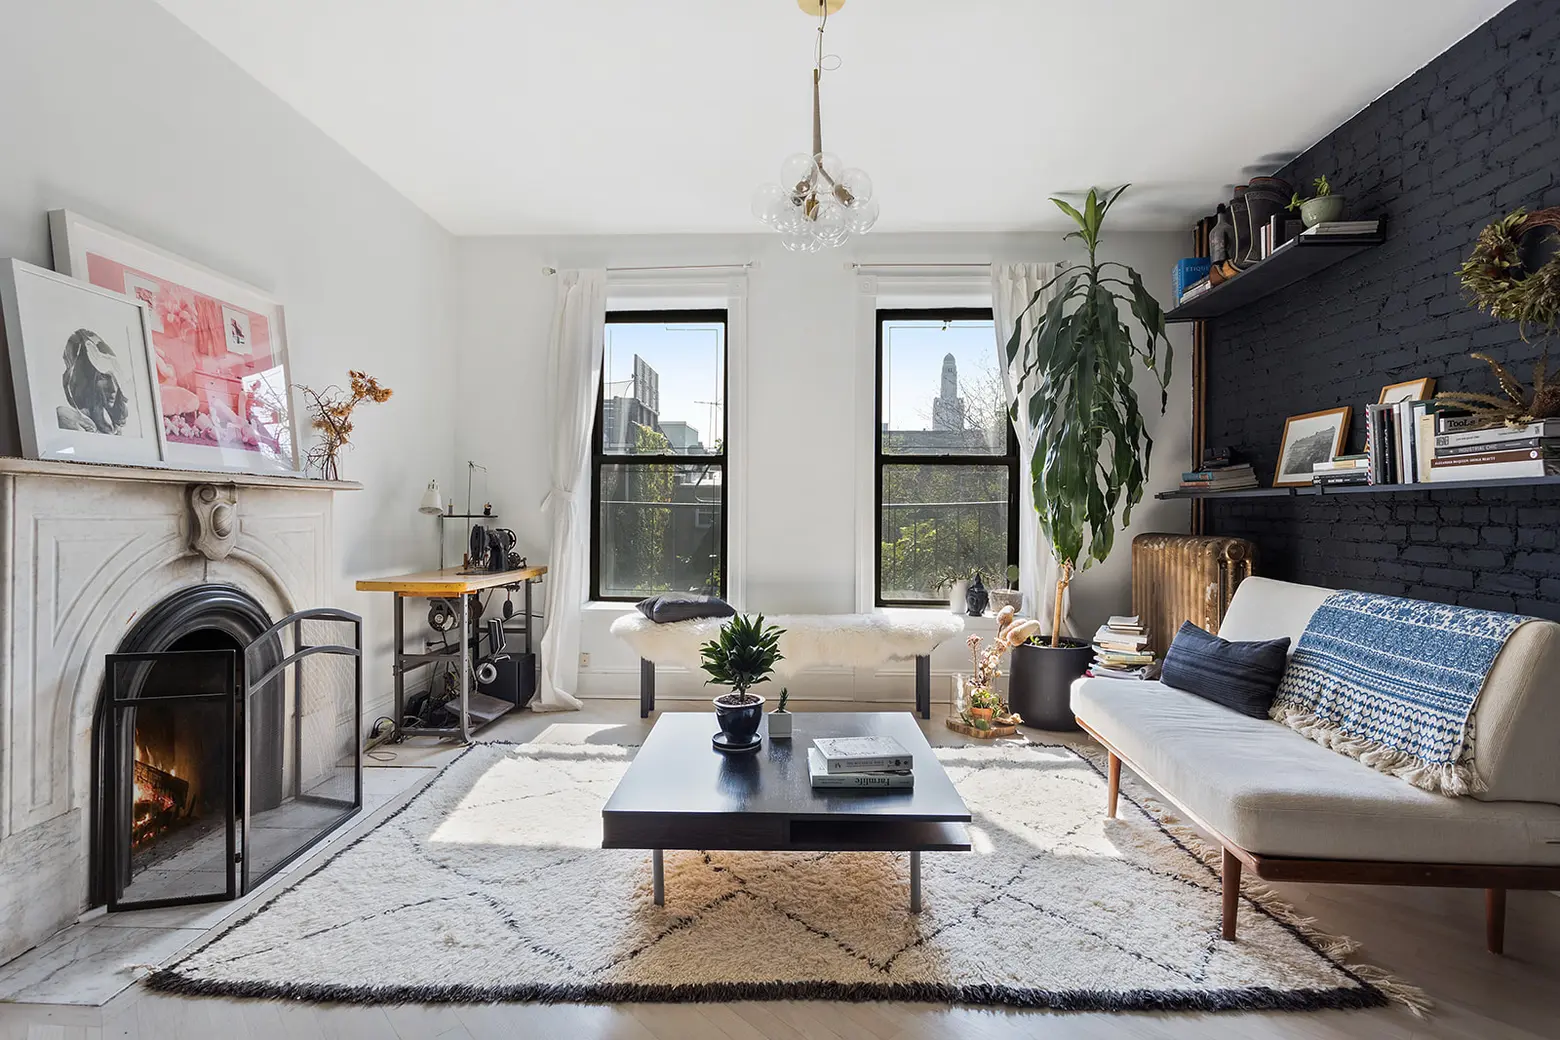 Rent a polished Fort Greene one bedroom with a wood-burning fireplace for $3K/month